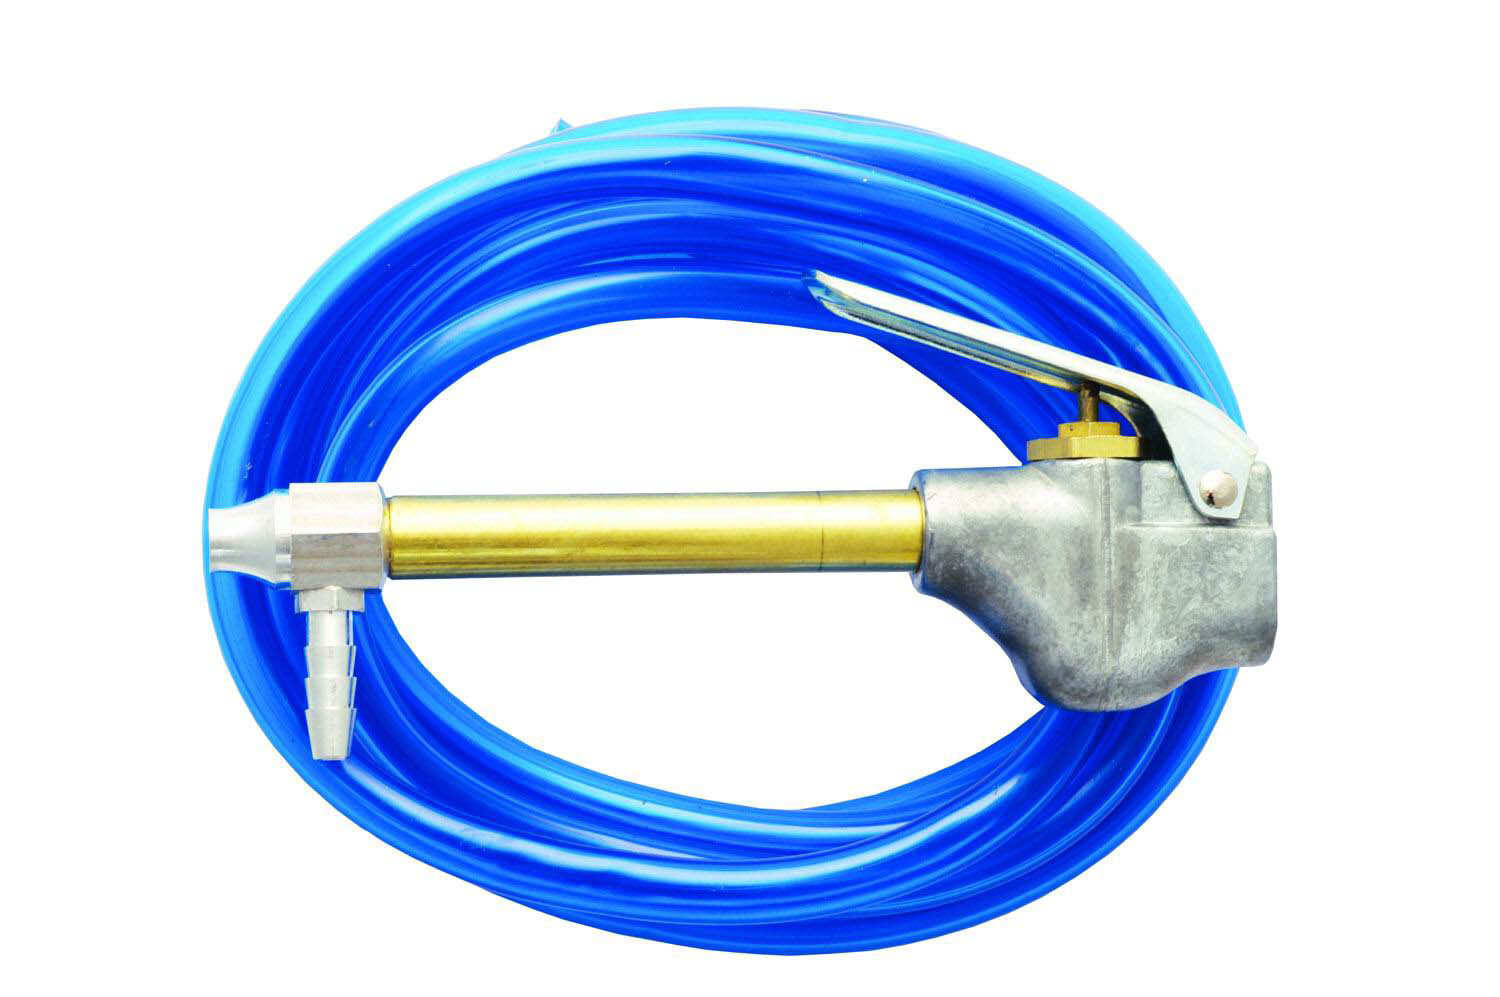 Milton Industries Milton (S-157) Siphon Spray-Cleaning Blow Gun & Hose Tubing Kit - Made For Use with Liquids - 150 PSI, 2 Piece